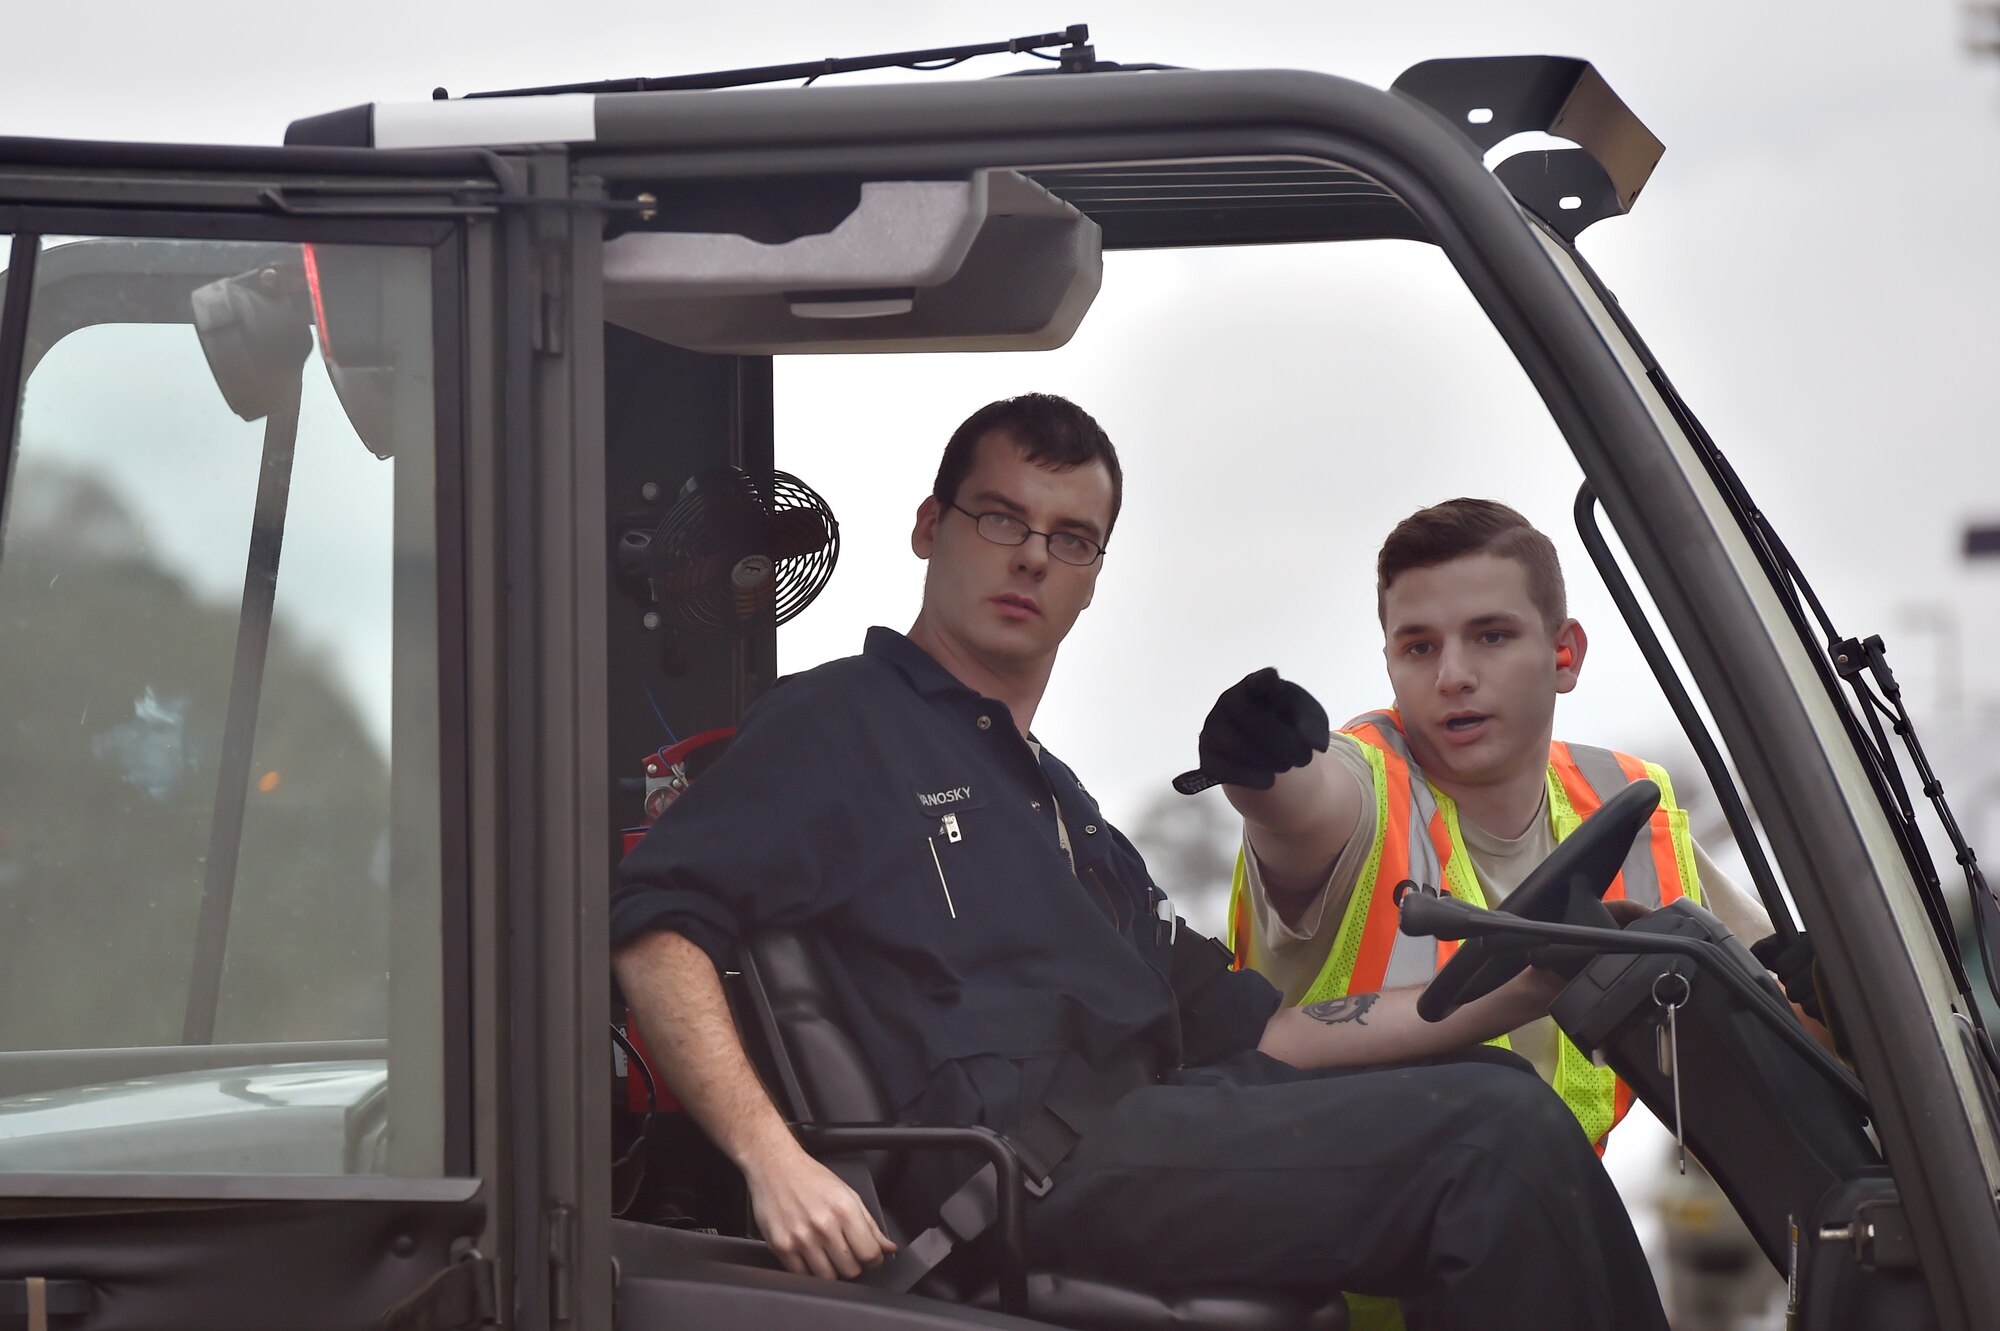 Senior Airman Nicholas Thompson, 437th Aerial Port Squadron, right, directs a forklift operator through a cargo deployment function during a simulated cargo inspection as part of mobility exercise Bold Eagle Feb. 26, at Joint Base Charleston, S.C.